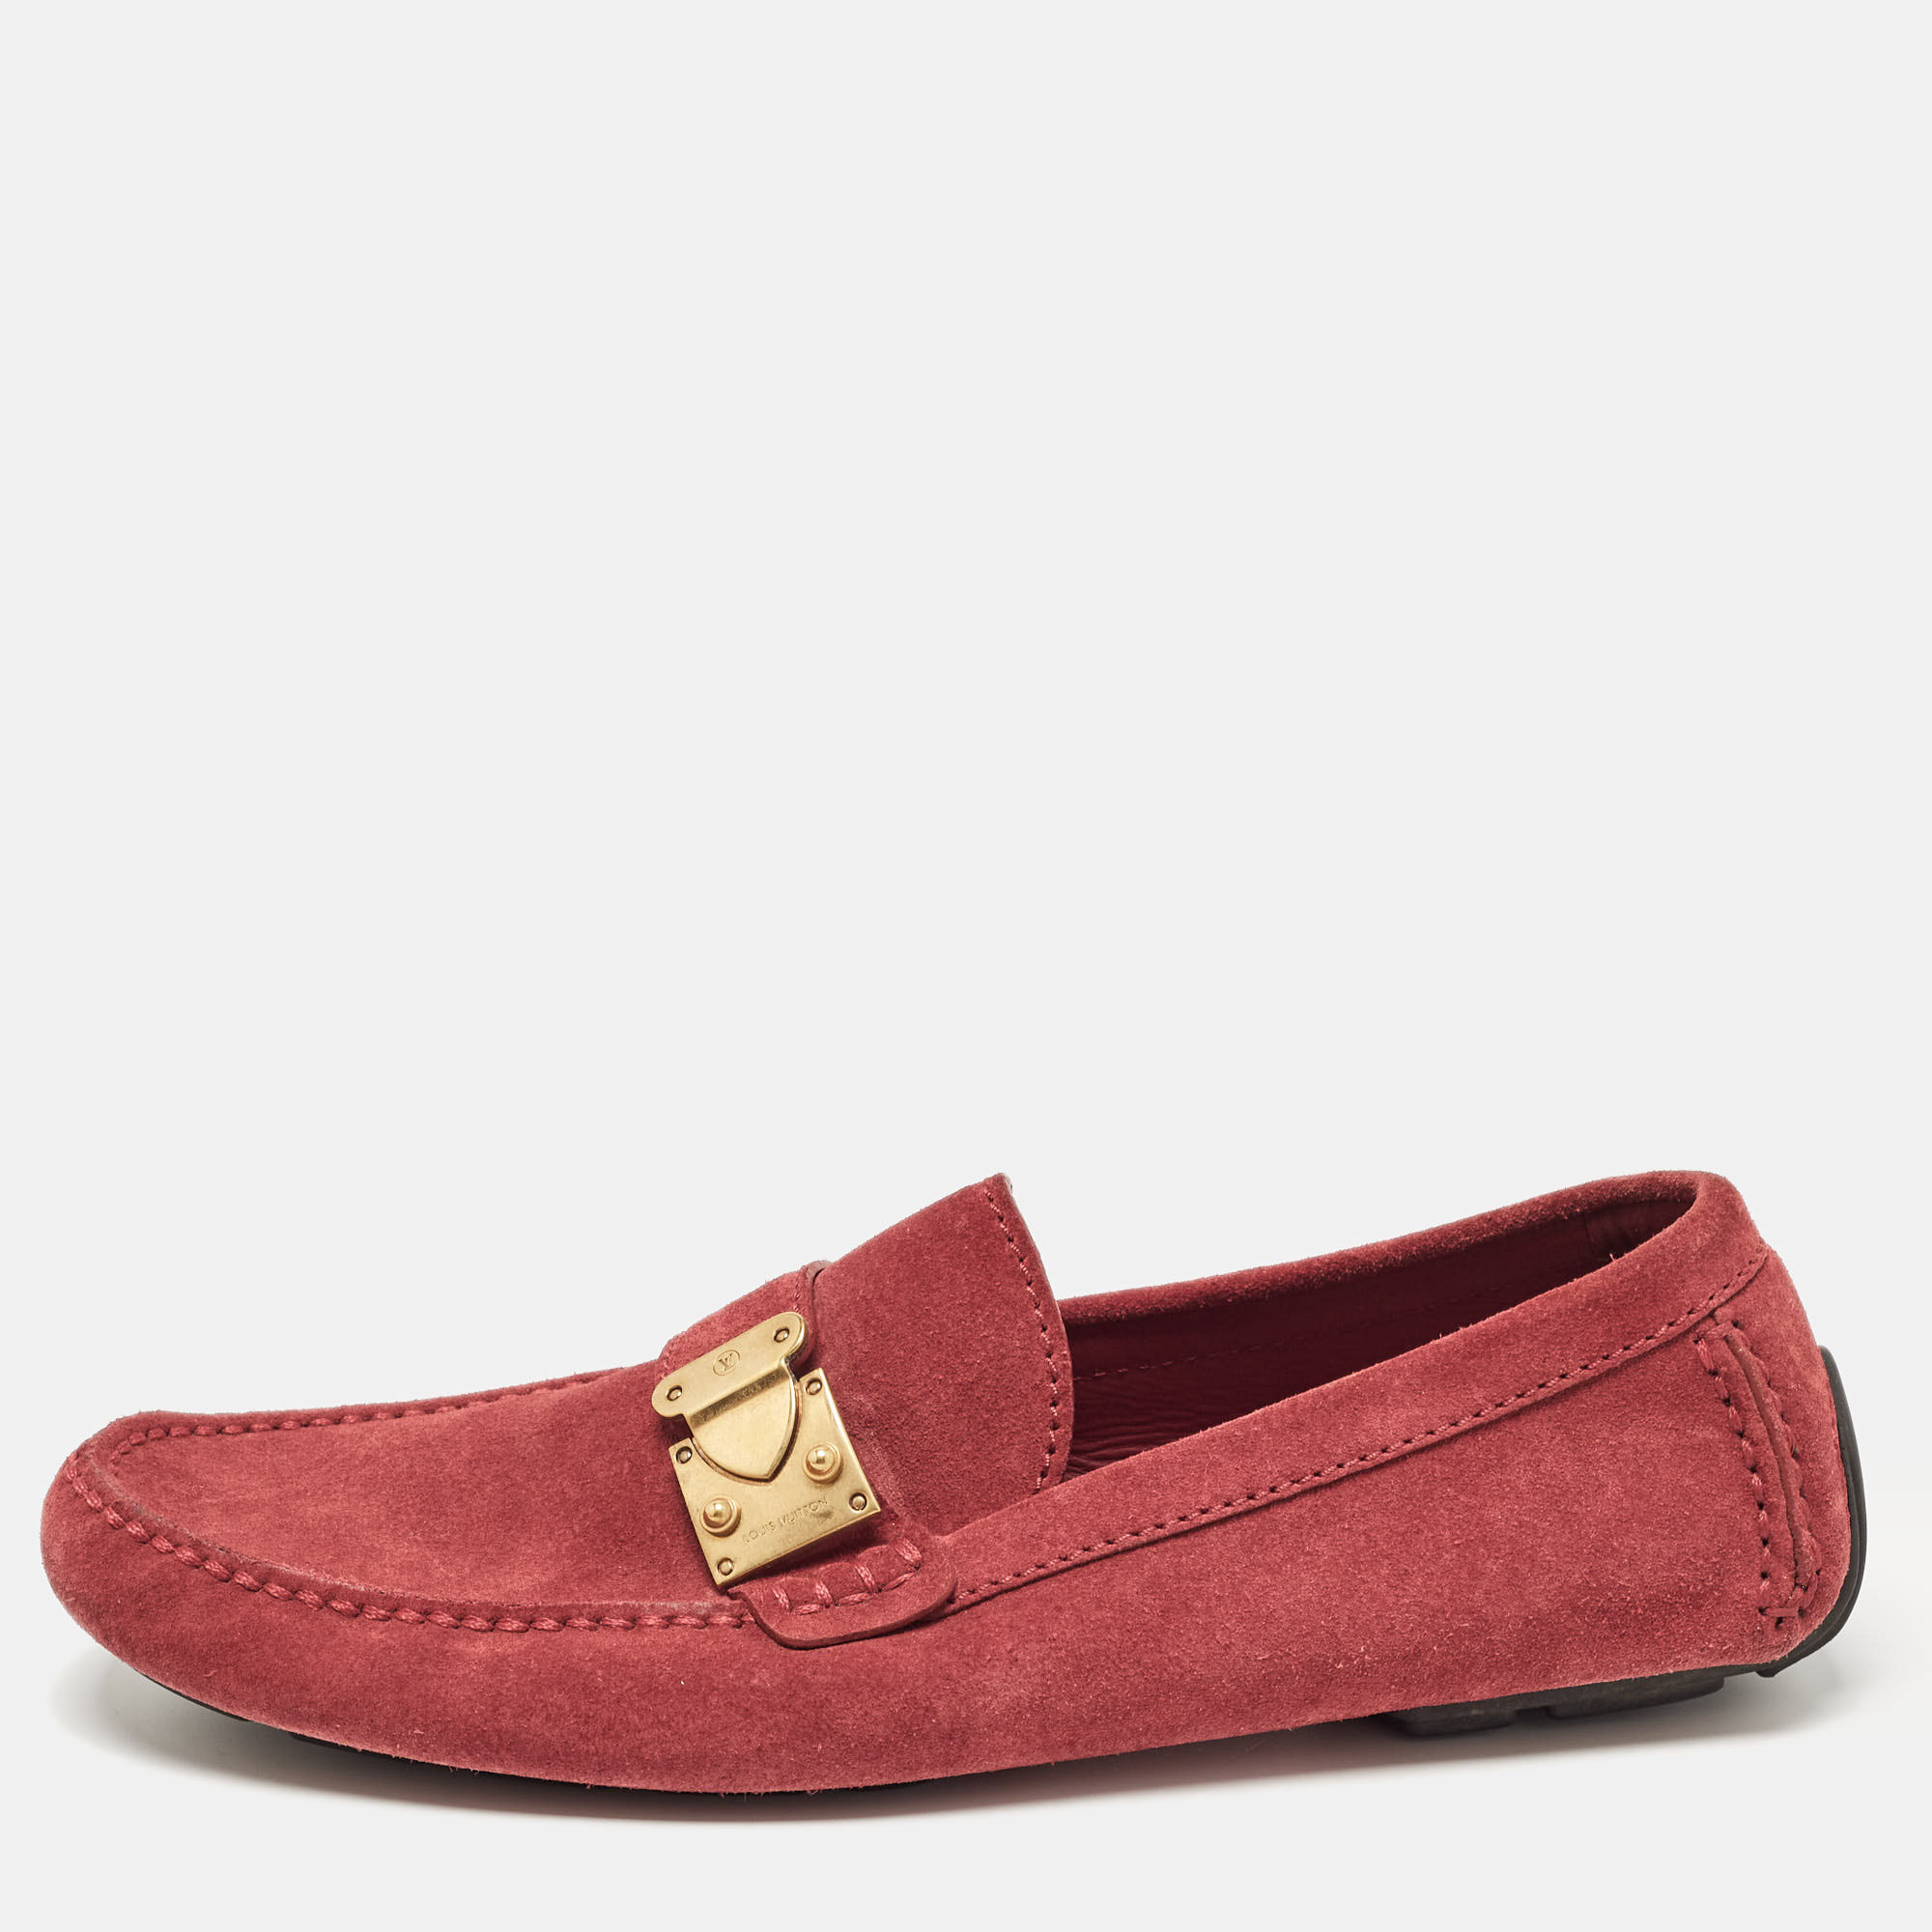 Louis vuitton red suede lombok loafers size 43.5